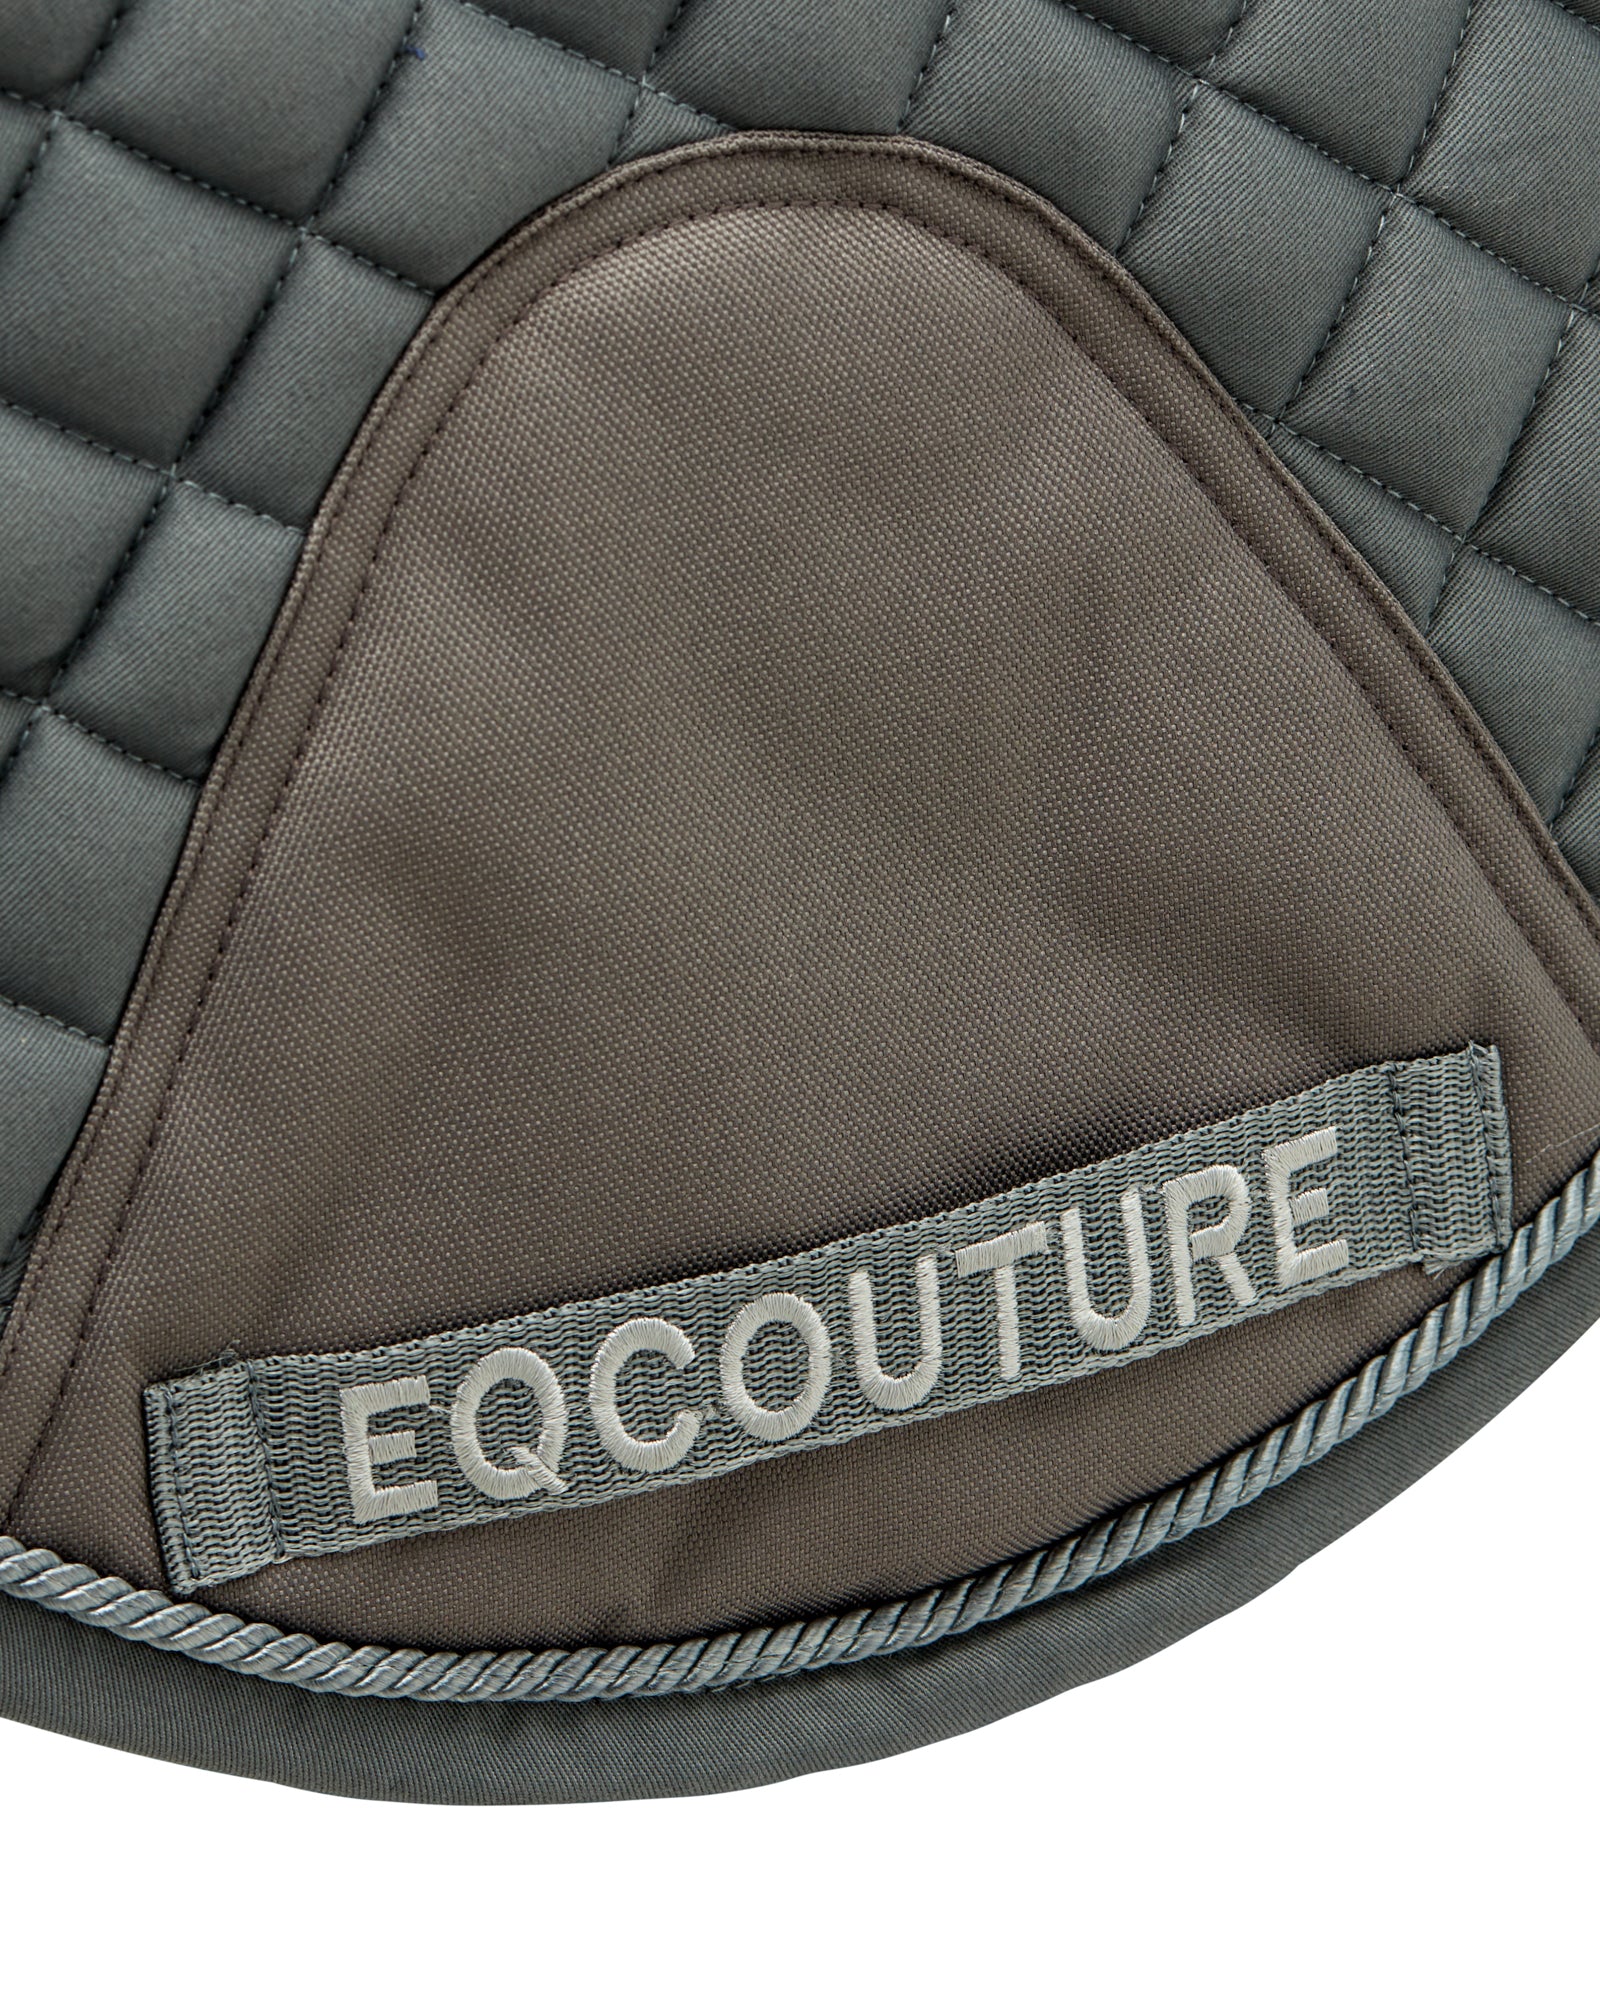 Eqcouture 'Symmetry' Classic Quilt Jumping Saddle Pad - STEEL (GREY)